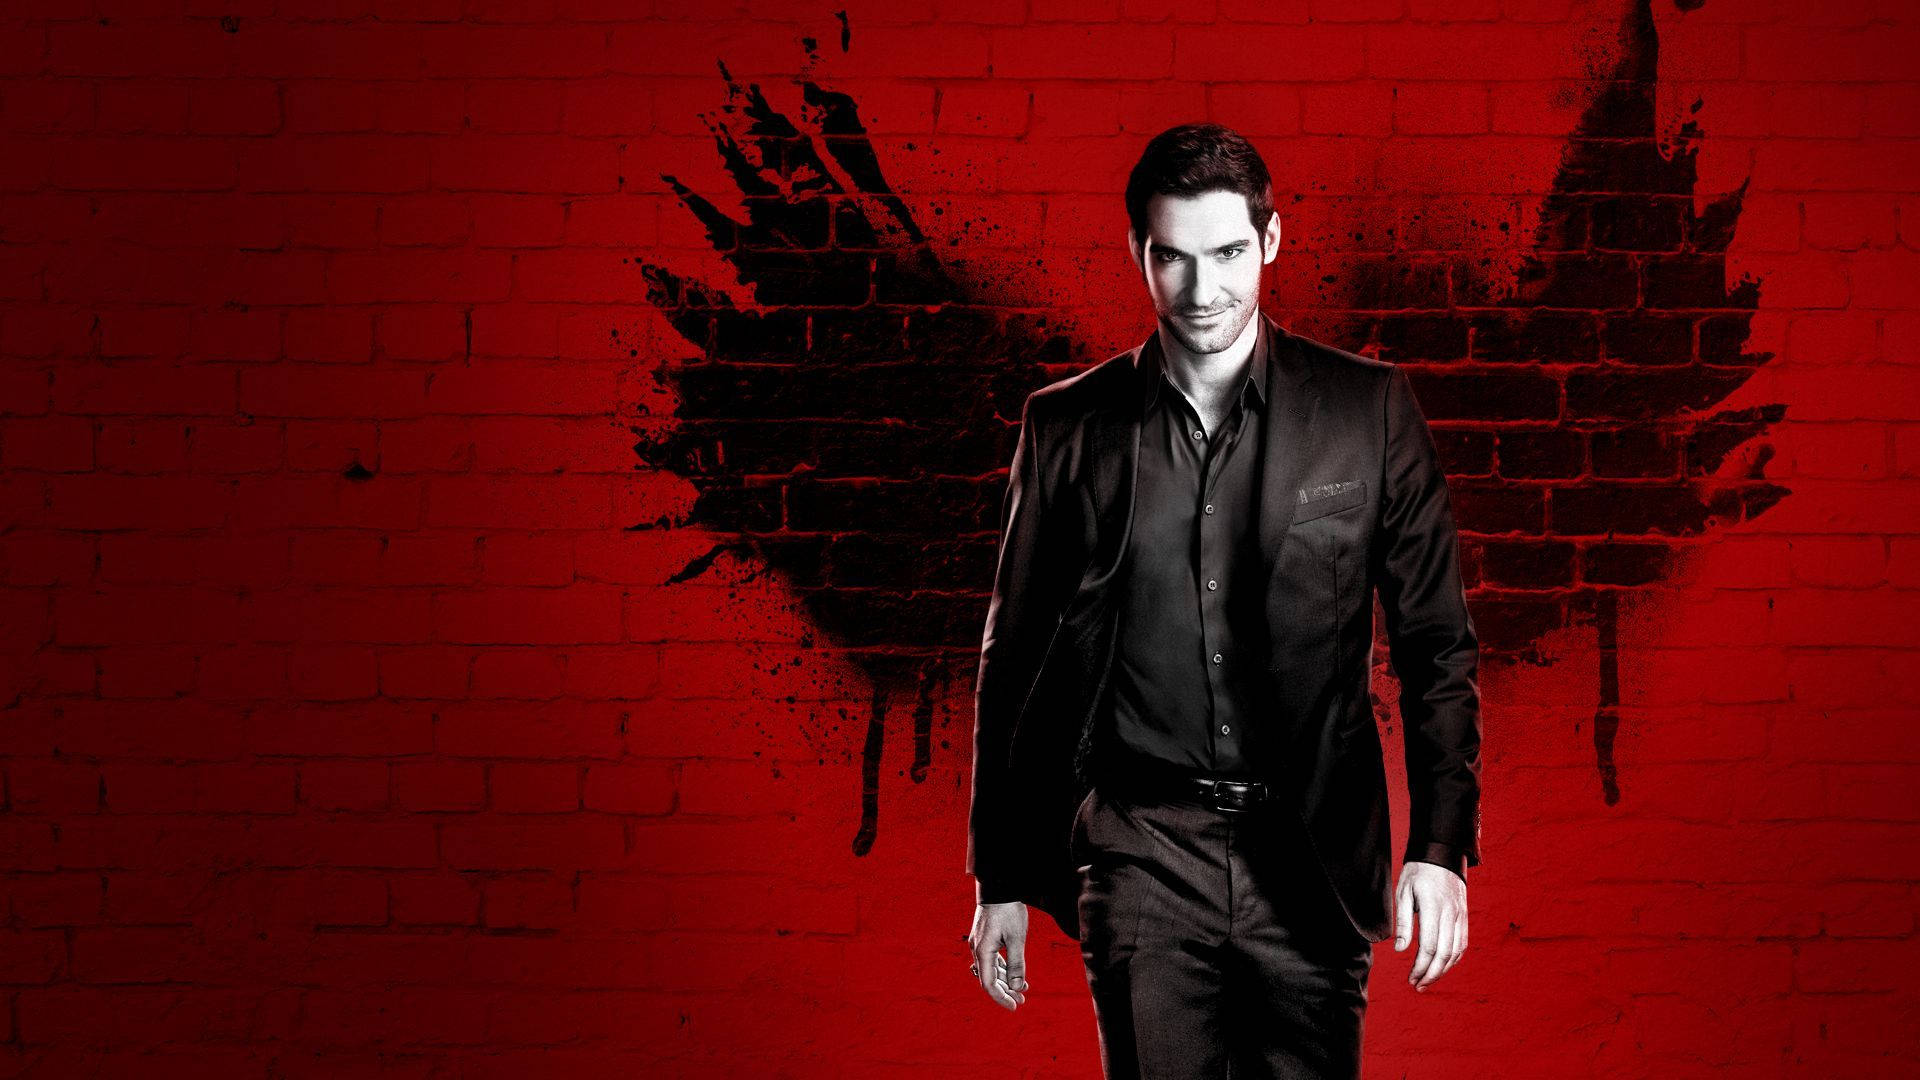 1920X1080 Lucifer Wallpaper and Background